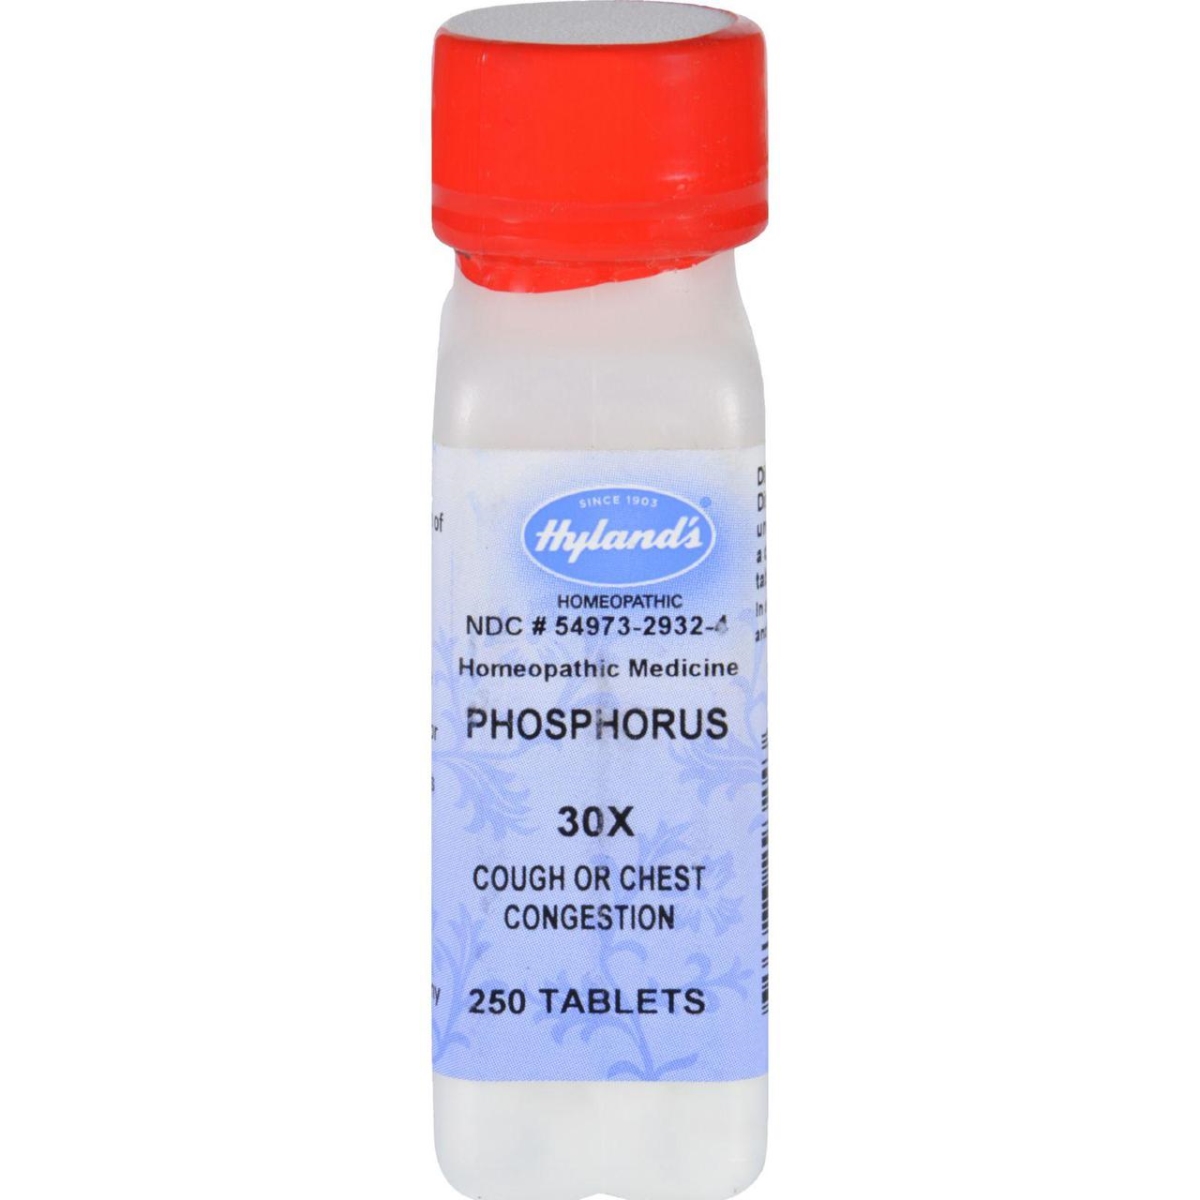 Hg1641364 Homeopathic Phosphorus 30x, Cough & Sore Throat - 250 Tablets